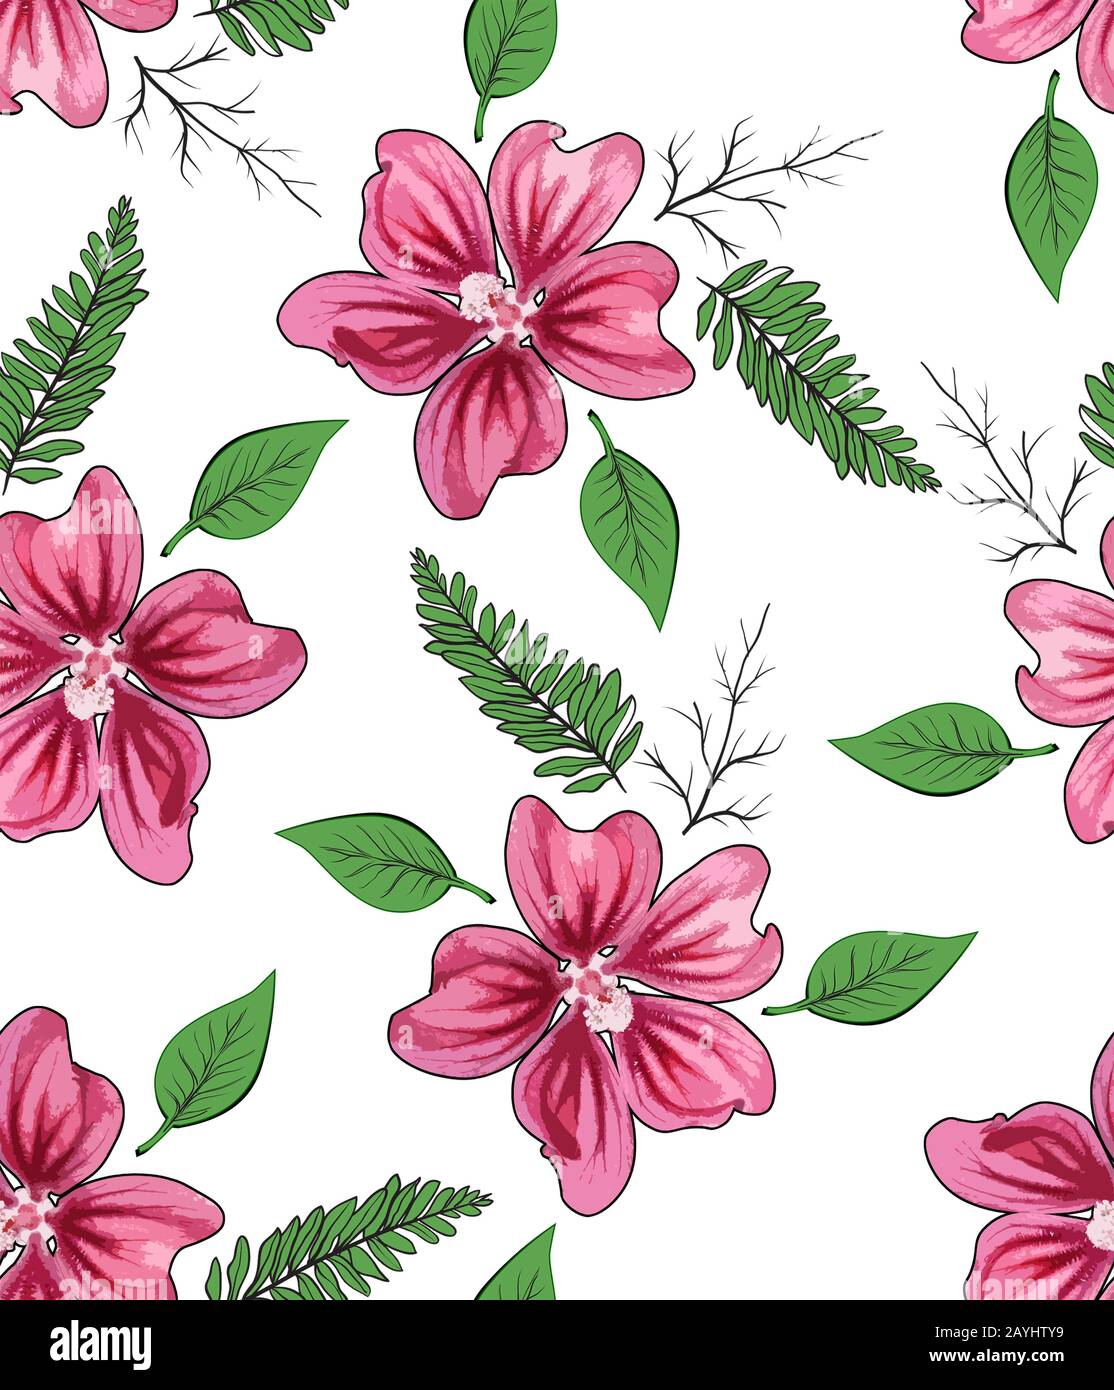 Beautiful Flower And Branches Hand Draw Illustration Seamless Pattern Stock Photo Alamy,Where To Buy Rae Dunn Wholesale